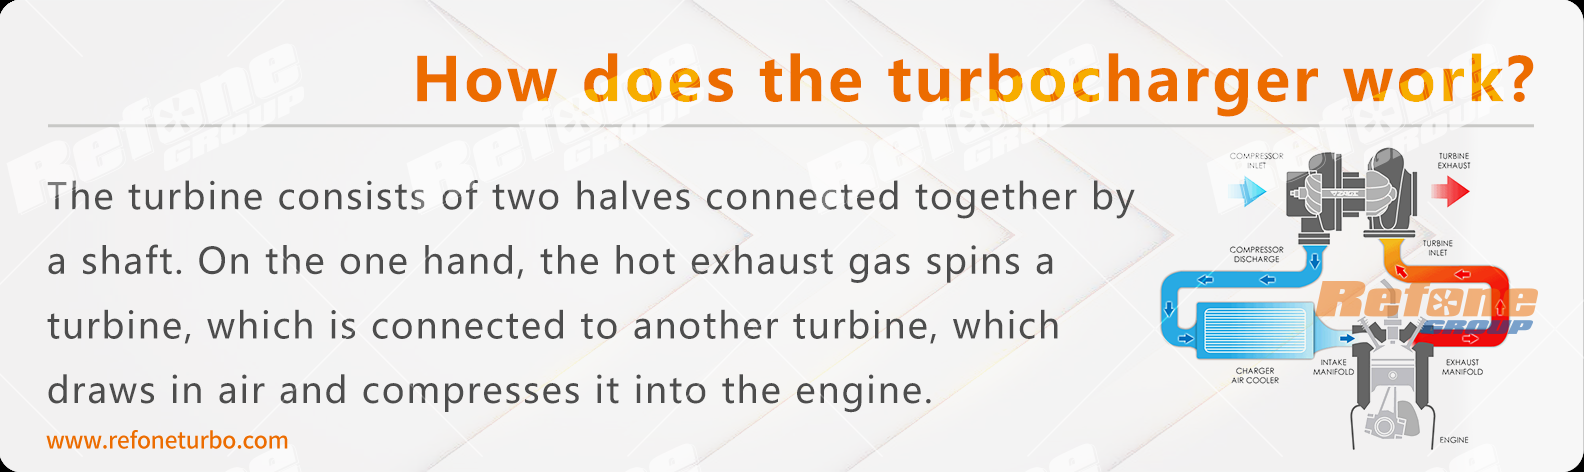 how does a turbocharger work